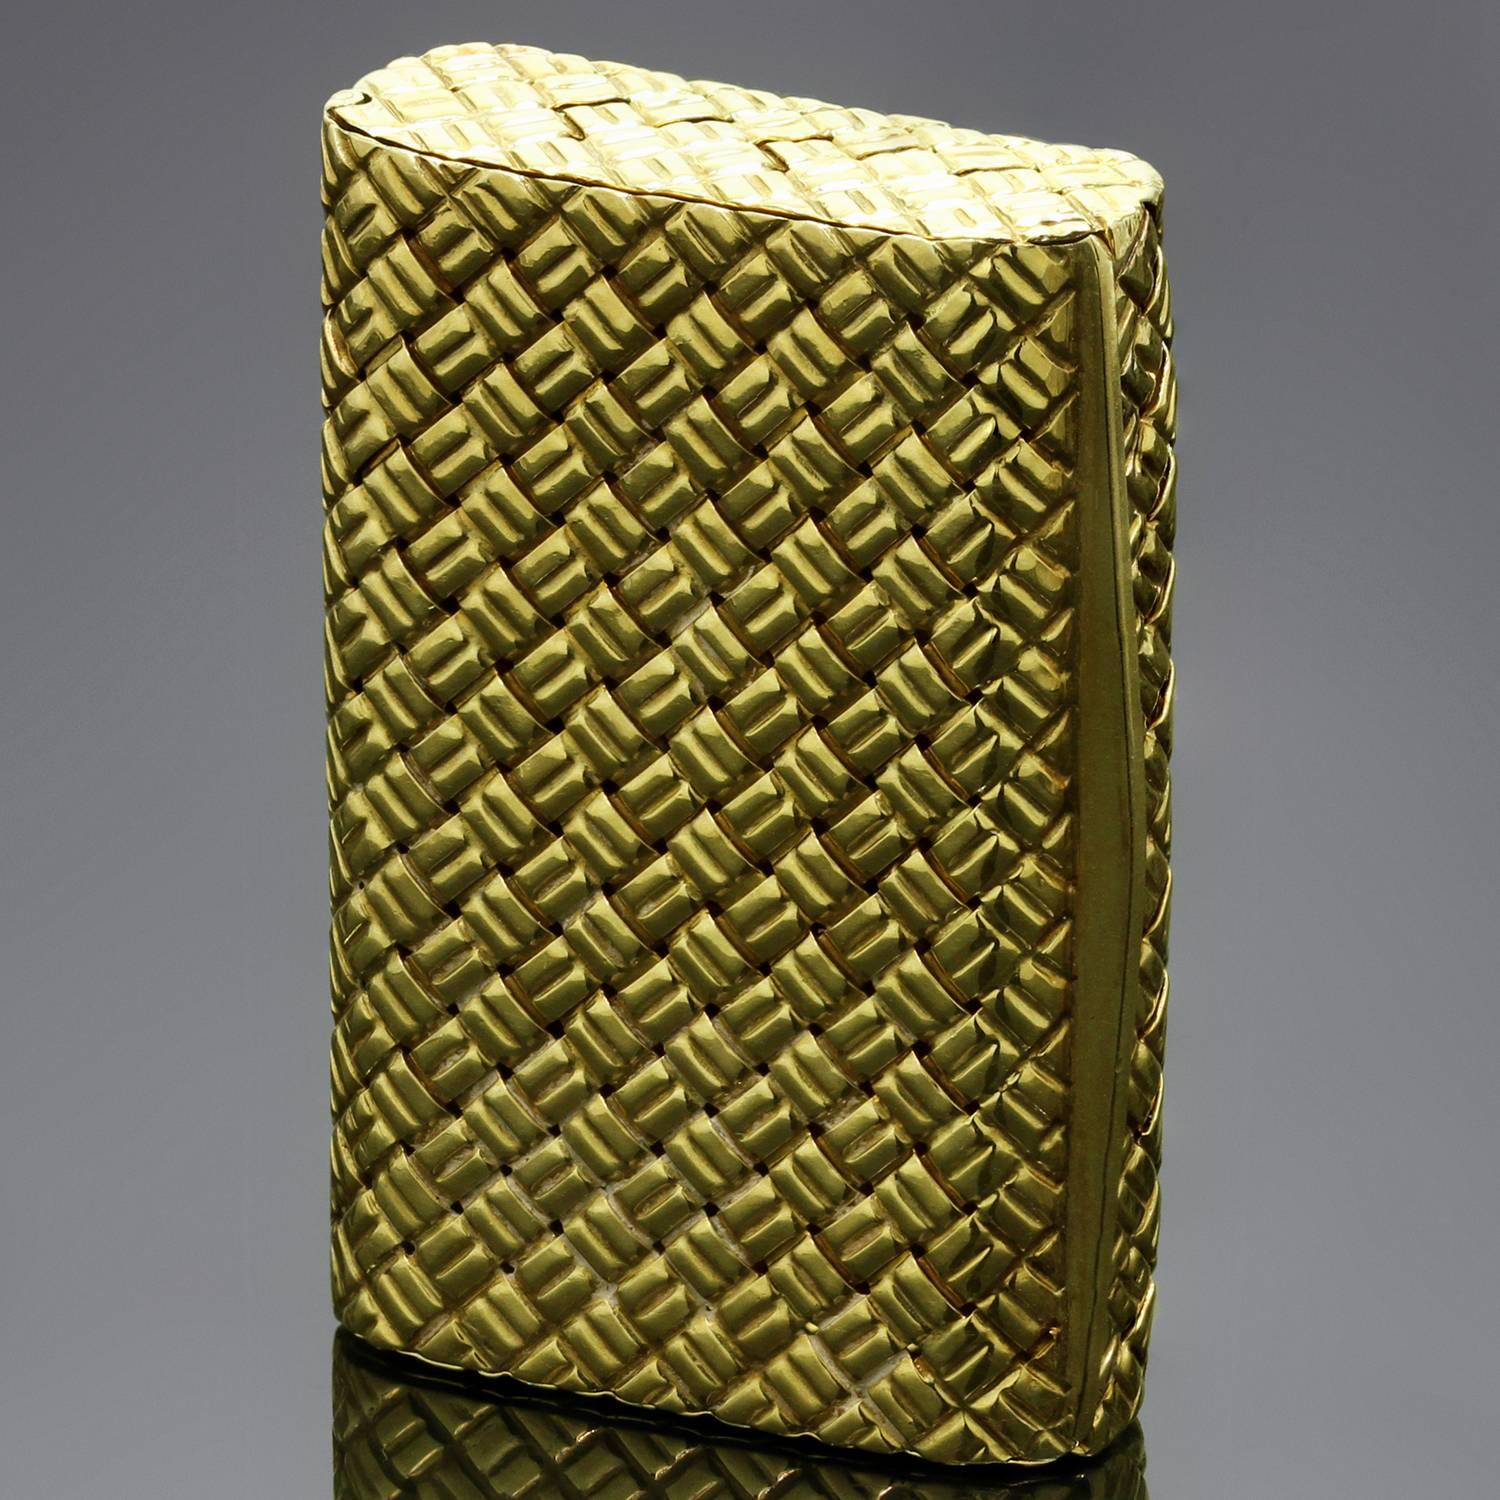 This fabulous Objets d'Art piece from Van Cleef & Arpels Objets d'Art is a fully functional pill box featuring a beautiful woven pattern crafted in 18k yellow gold. Made in France circa 1950s-1960s. Measurements: 1.10